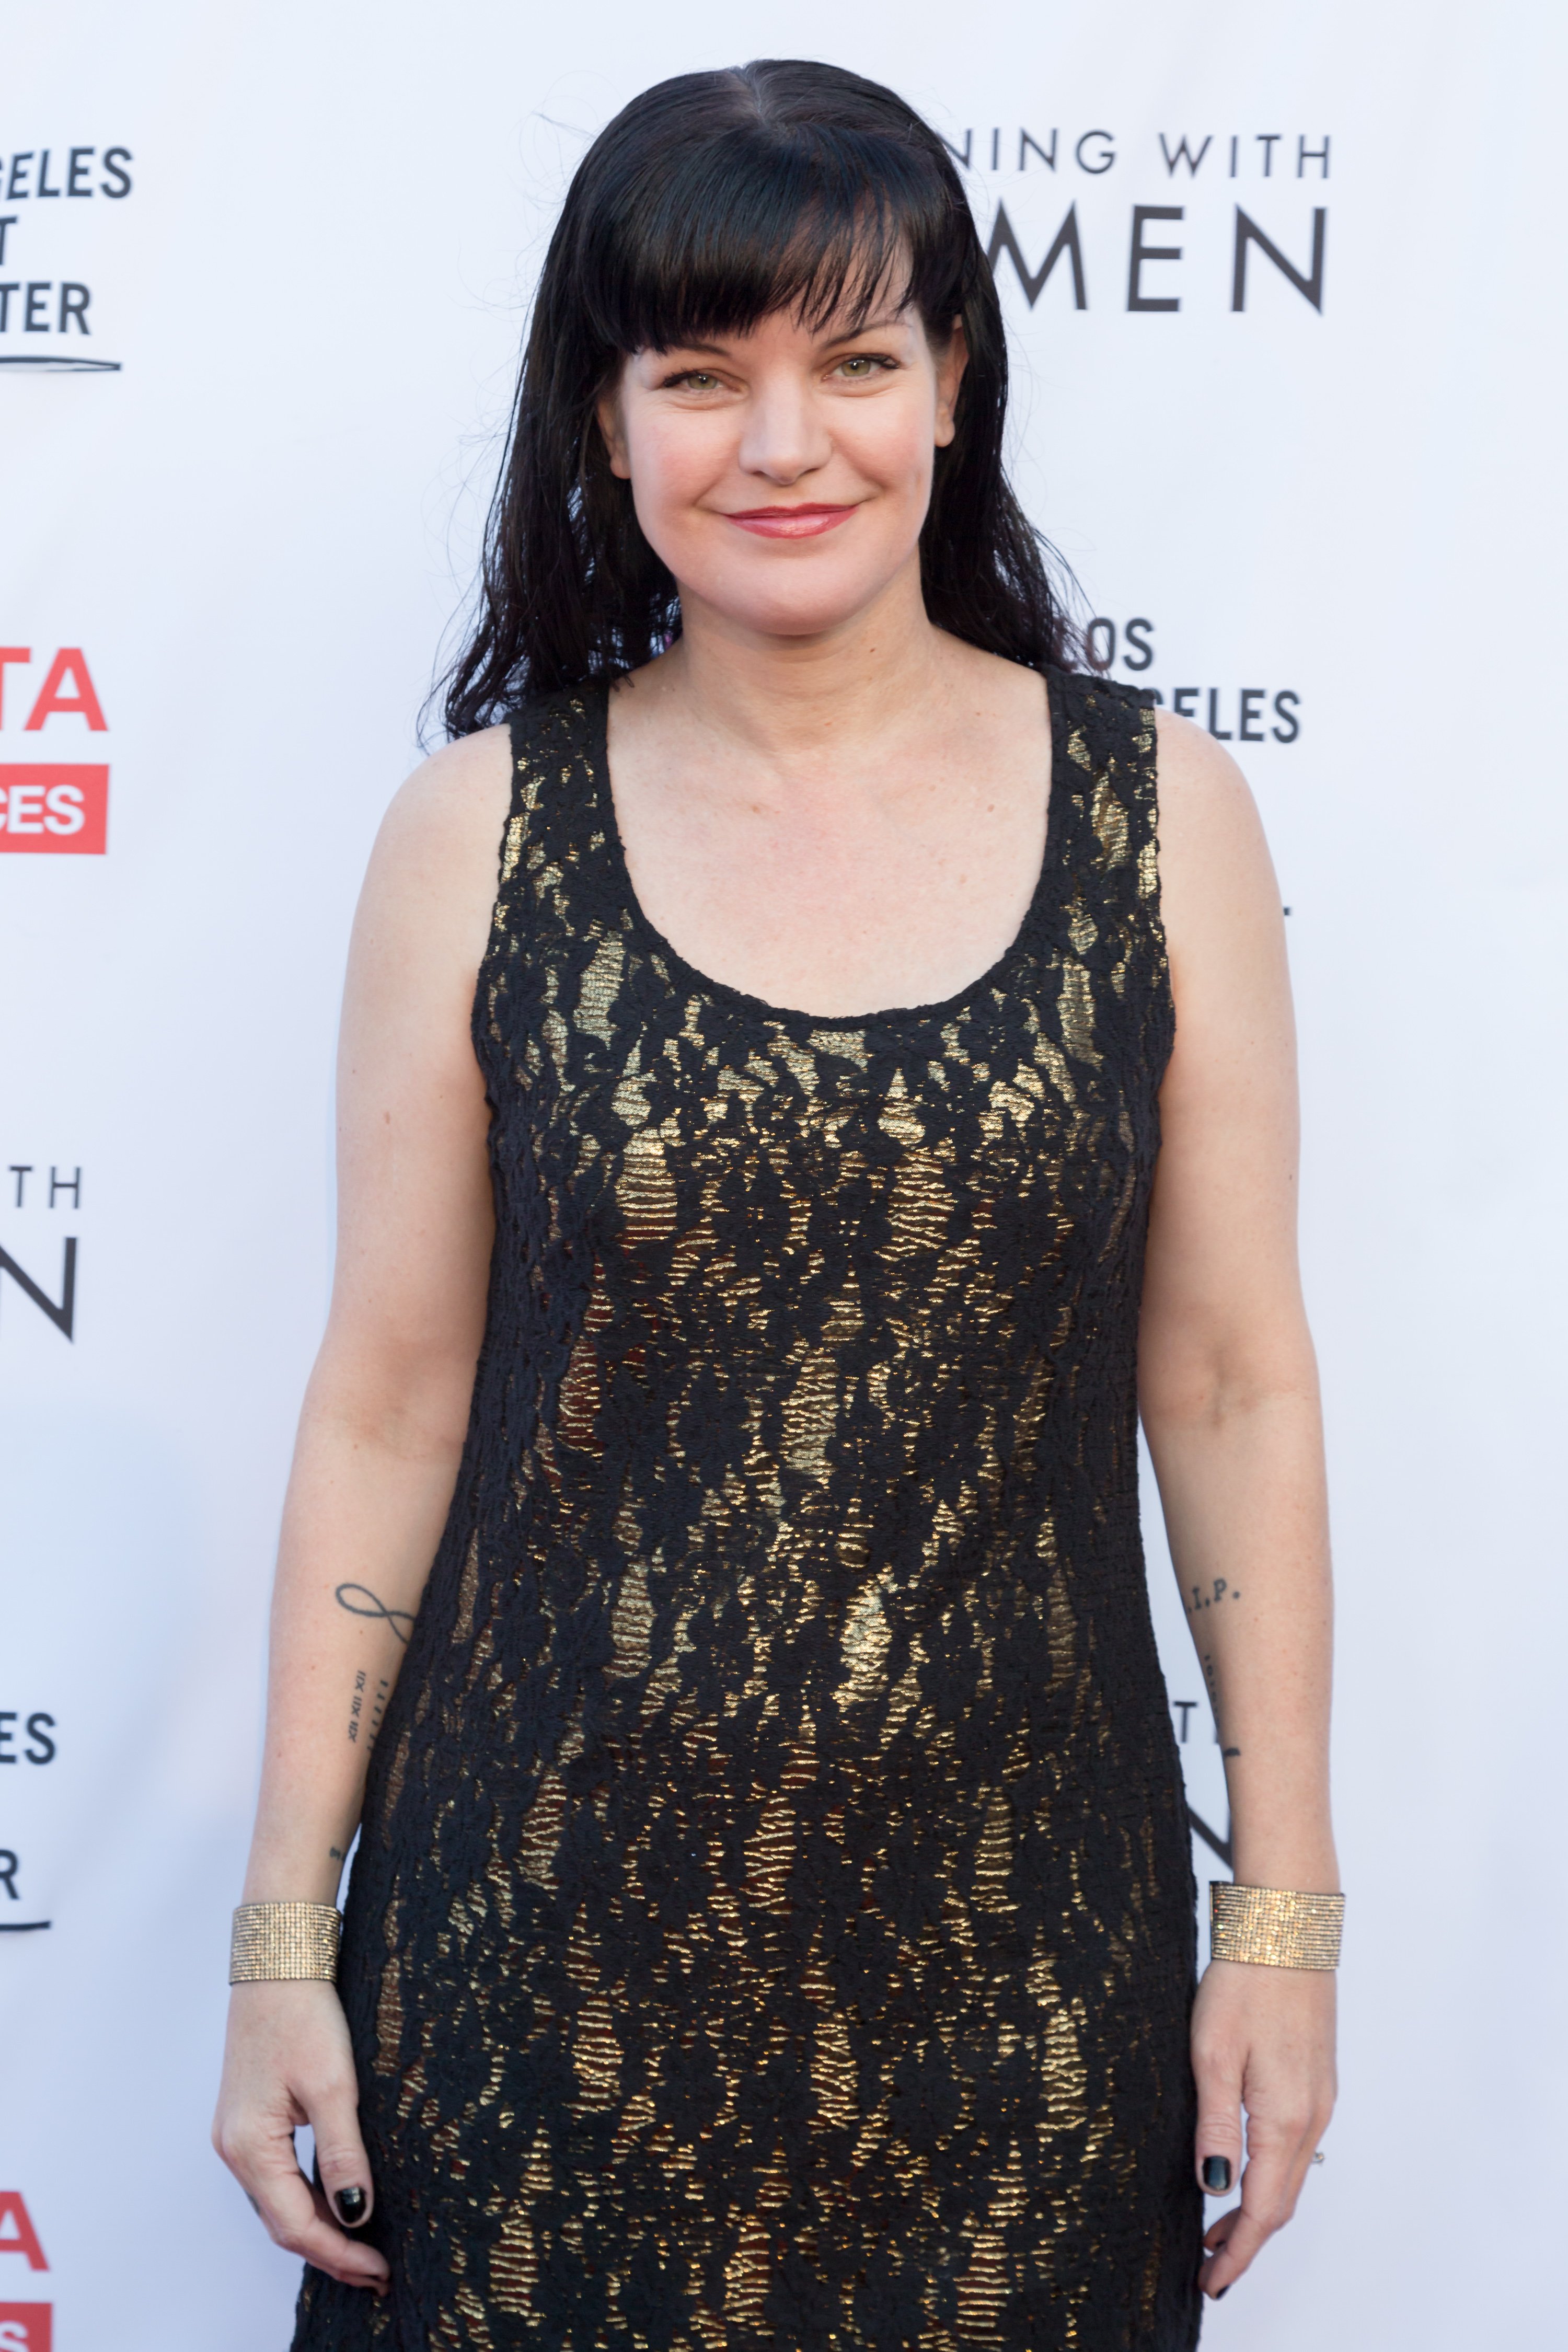 Pauley Perrette attend the Los Angeles LGBT Center's An Evening With Women on May 21, 2016, in Los Angeles, California. | Source: Getty Images.